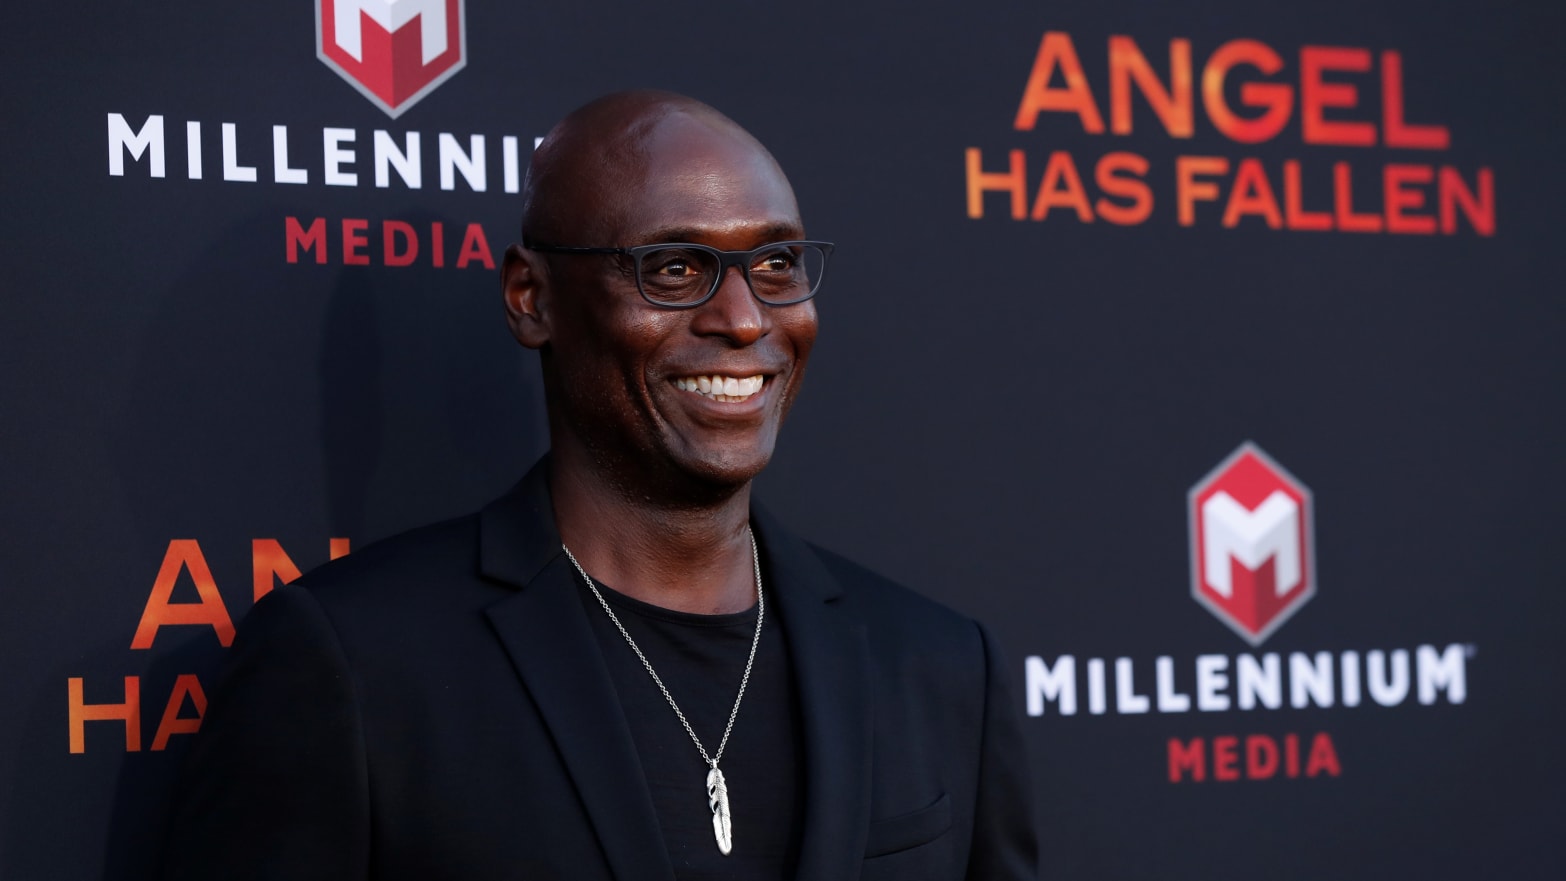 Lance Reddick, Star Of 'The Wire' And 'John Wick' Franchise